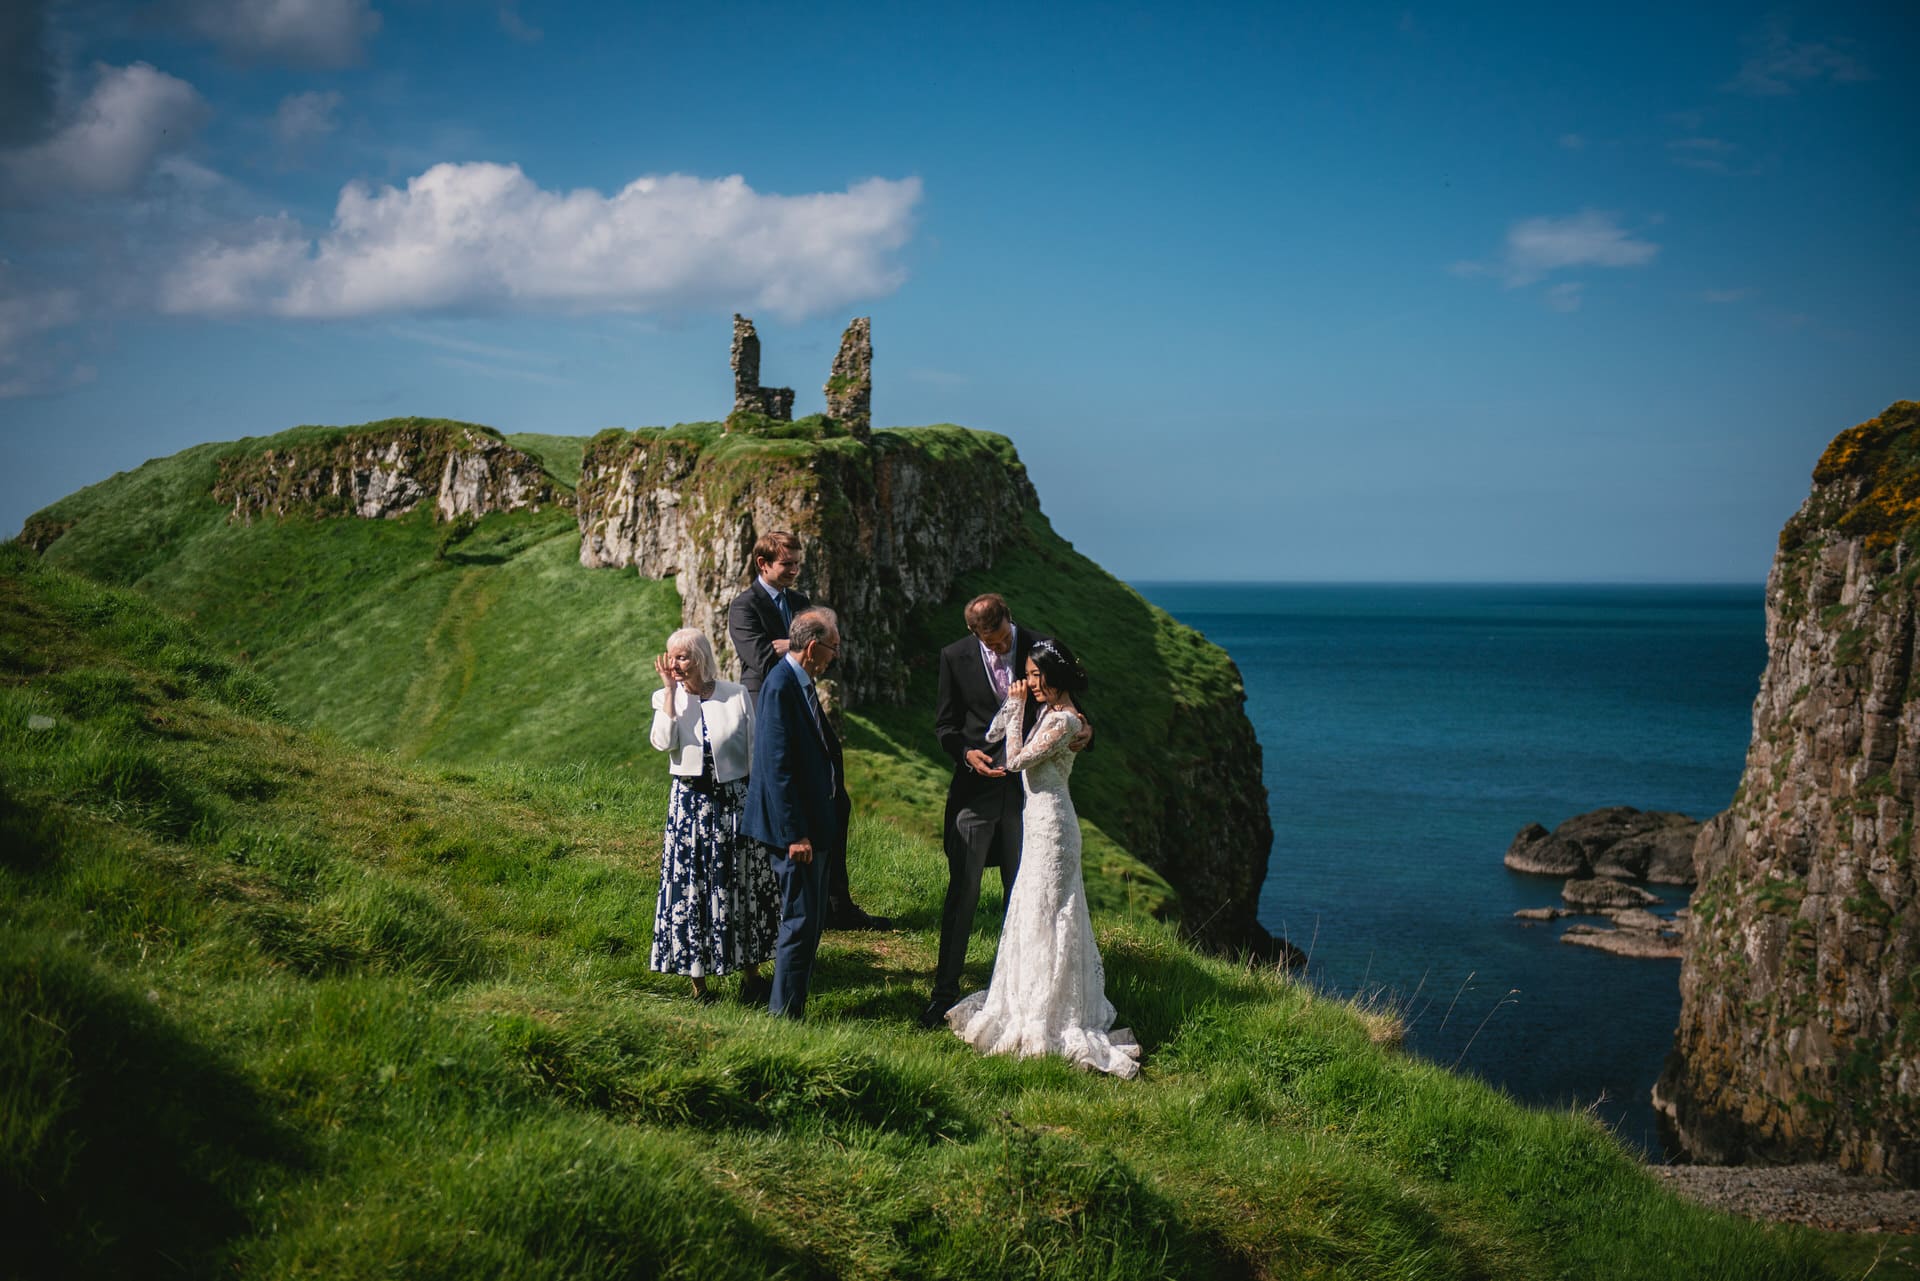 The couple sharing a heartfelt moment as they stand before the castle ruins during their Northern Ireland elopement.